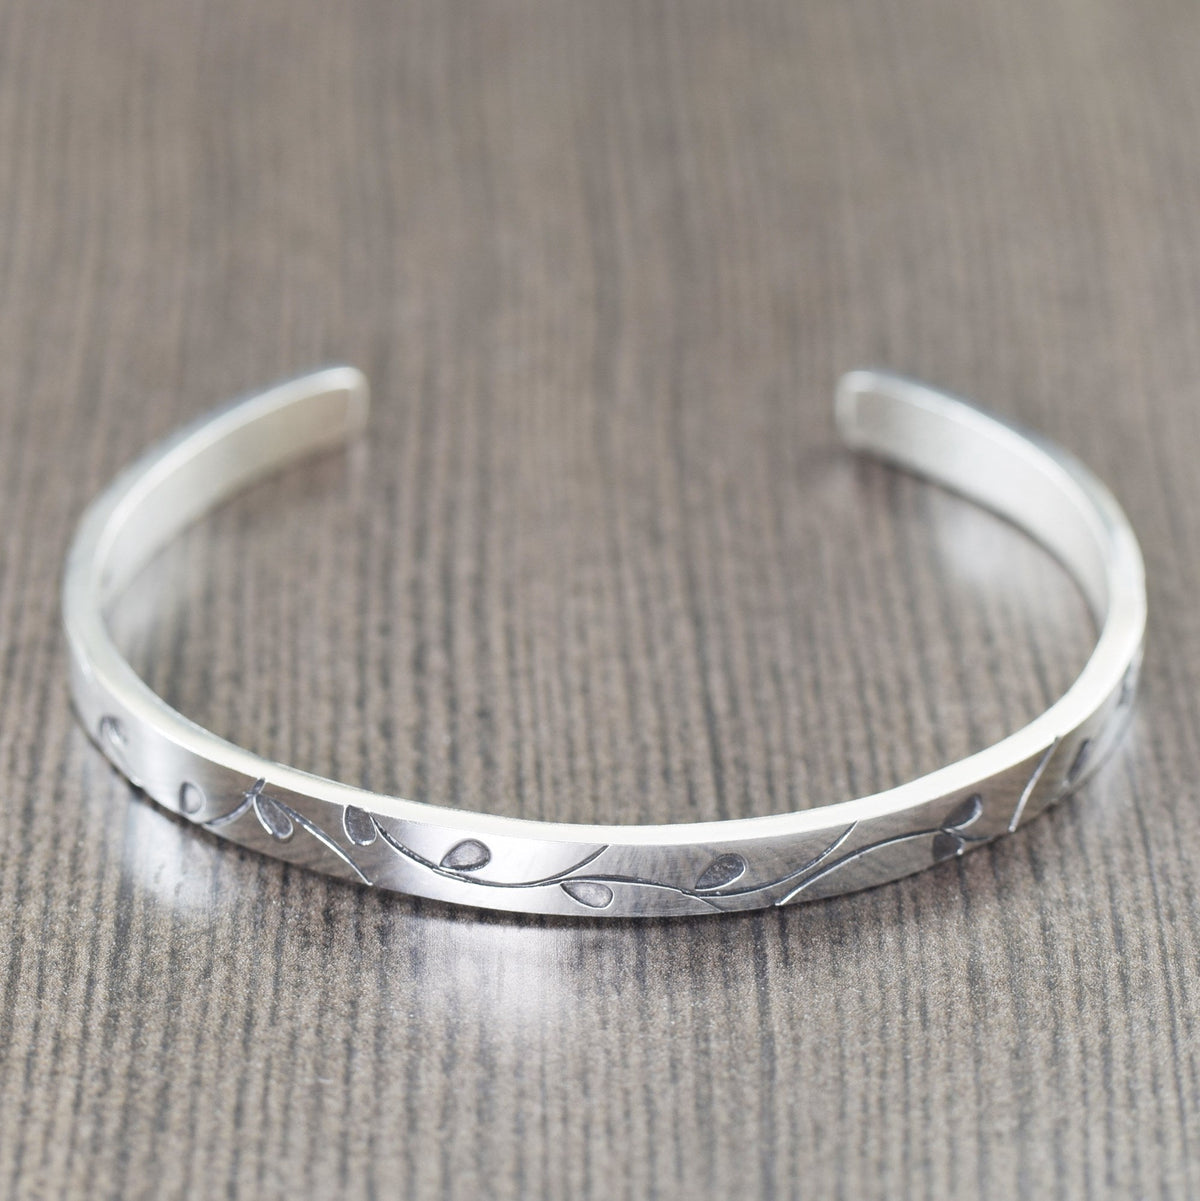 Leaf Sterling silver cuff bracelet featuring climbing vines gifts for her or him